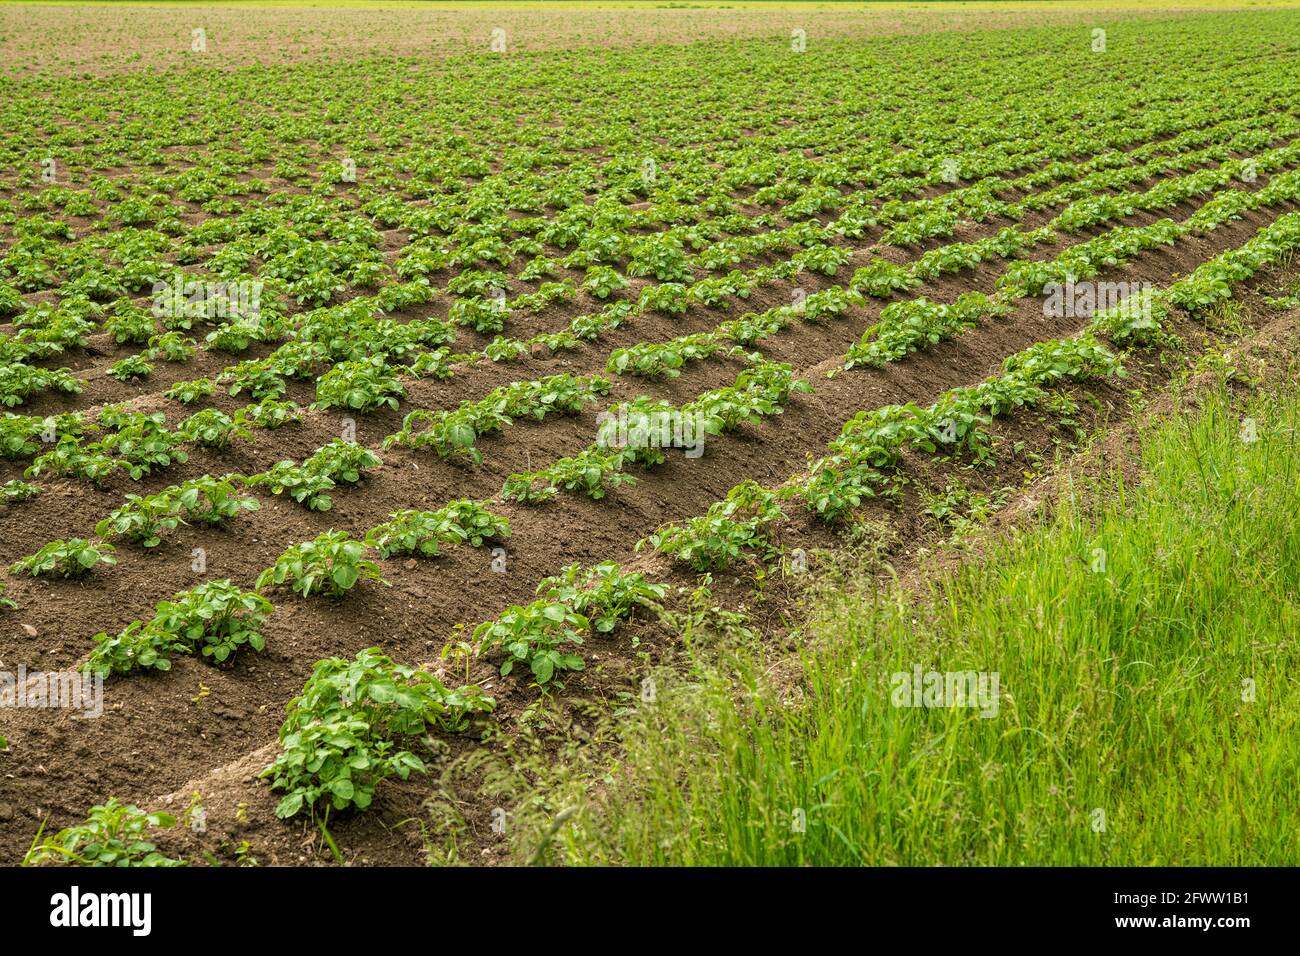 The potato plants in the field have already grown far and are perfectly aligned Stock Photo